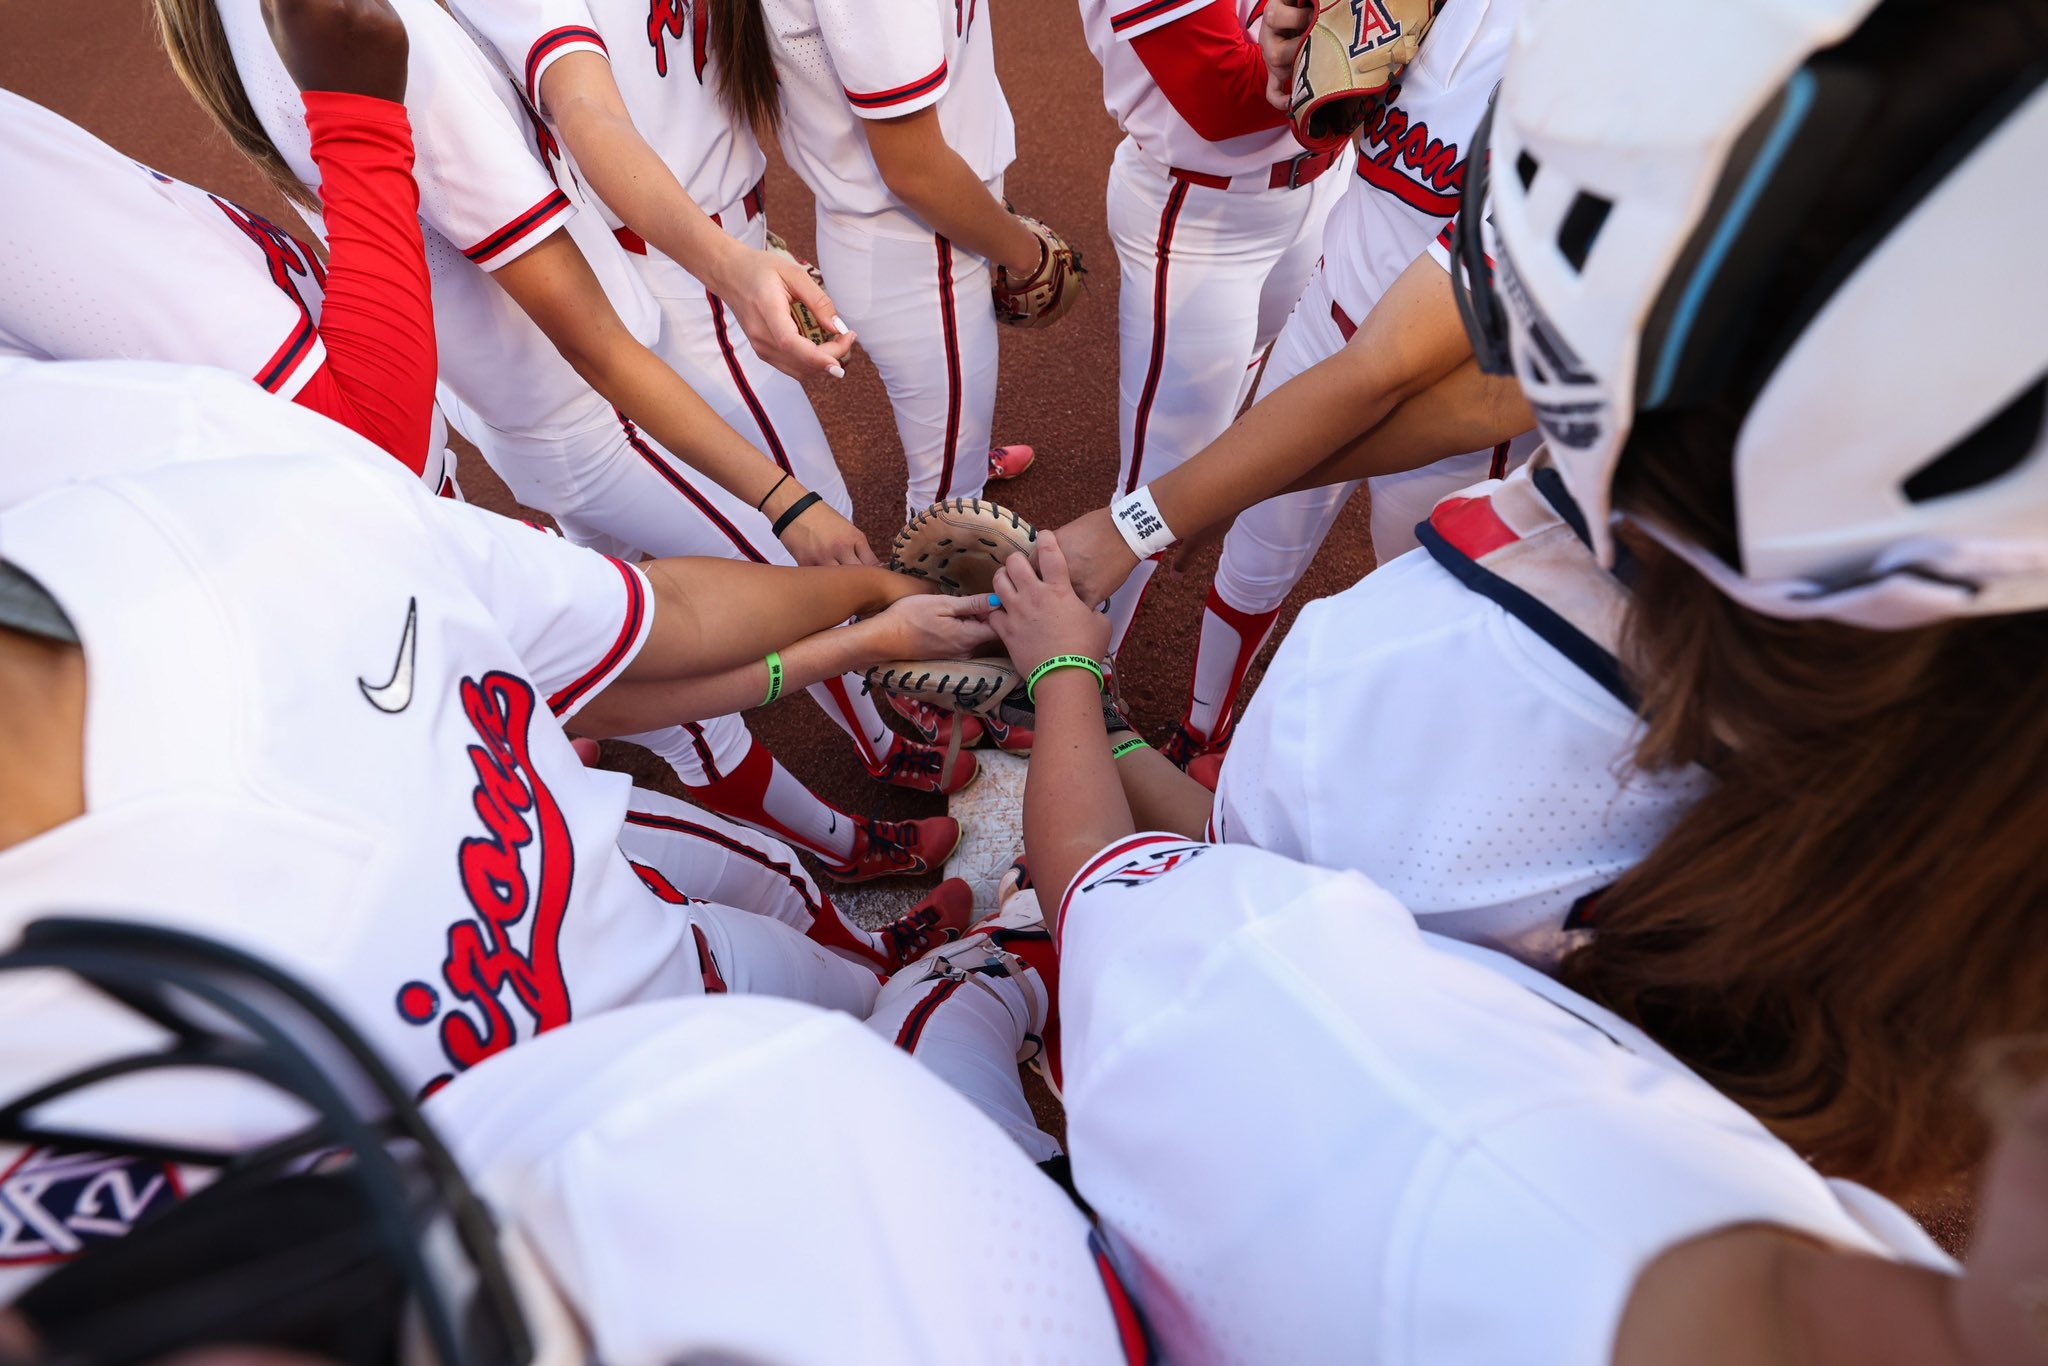 arizona-softball-what-will-big-12-look-like-2025-pac-realignment-recruiting-competition-travel-tv